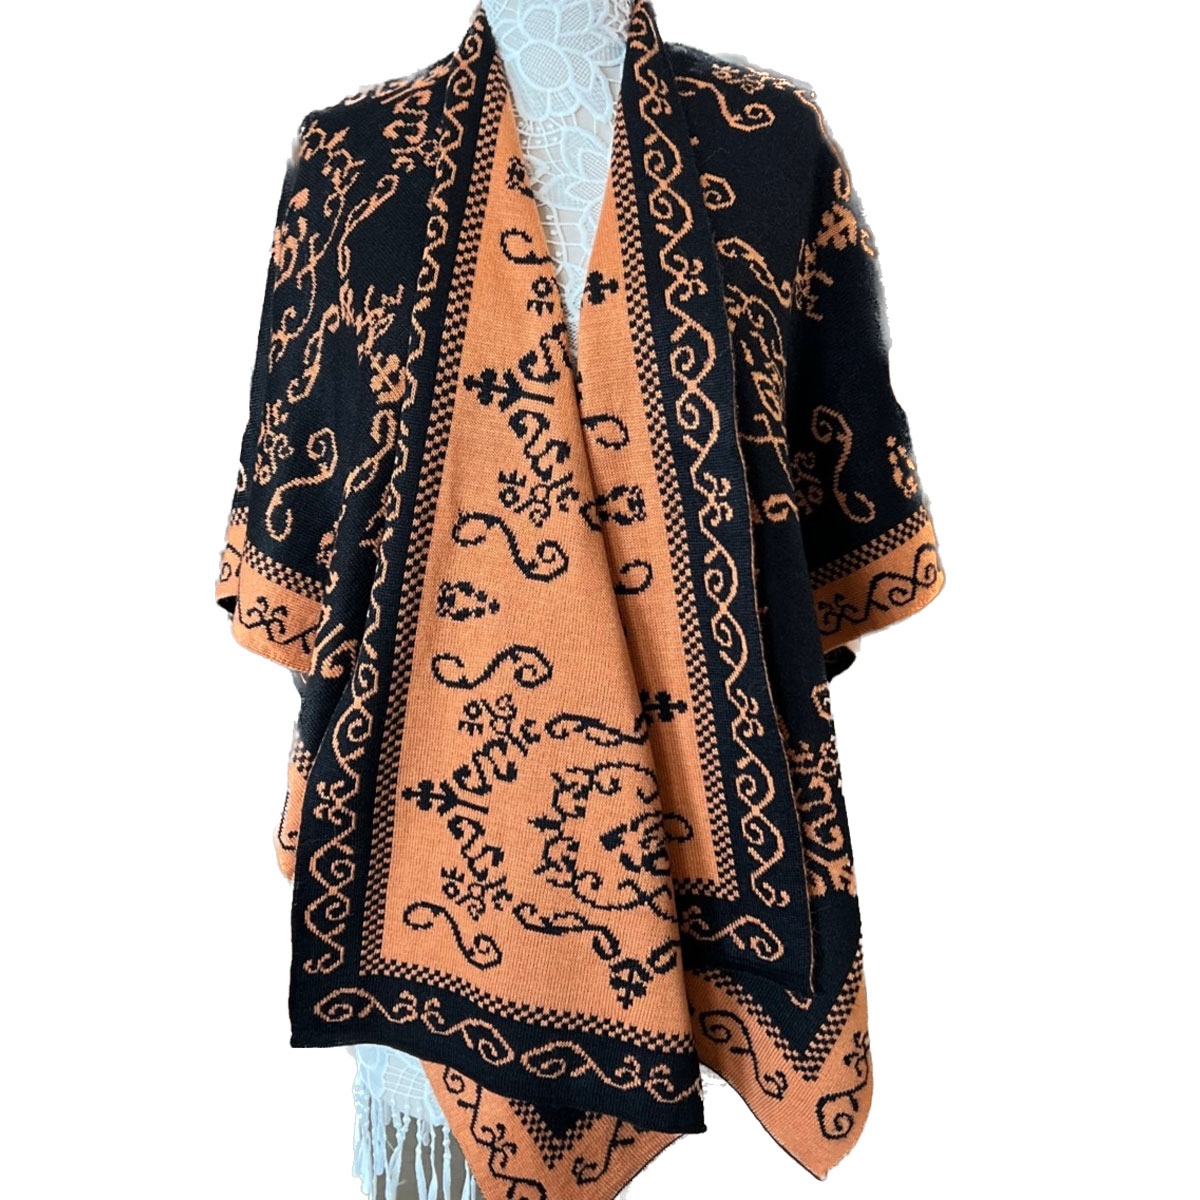 Reversible Wrap in Black and Peach